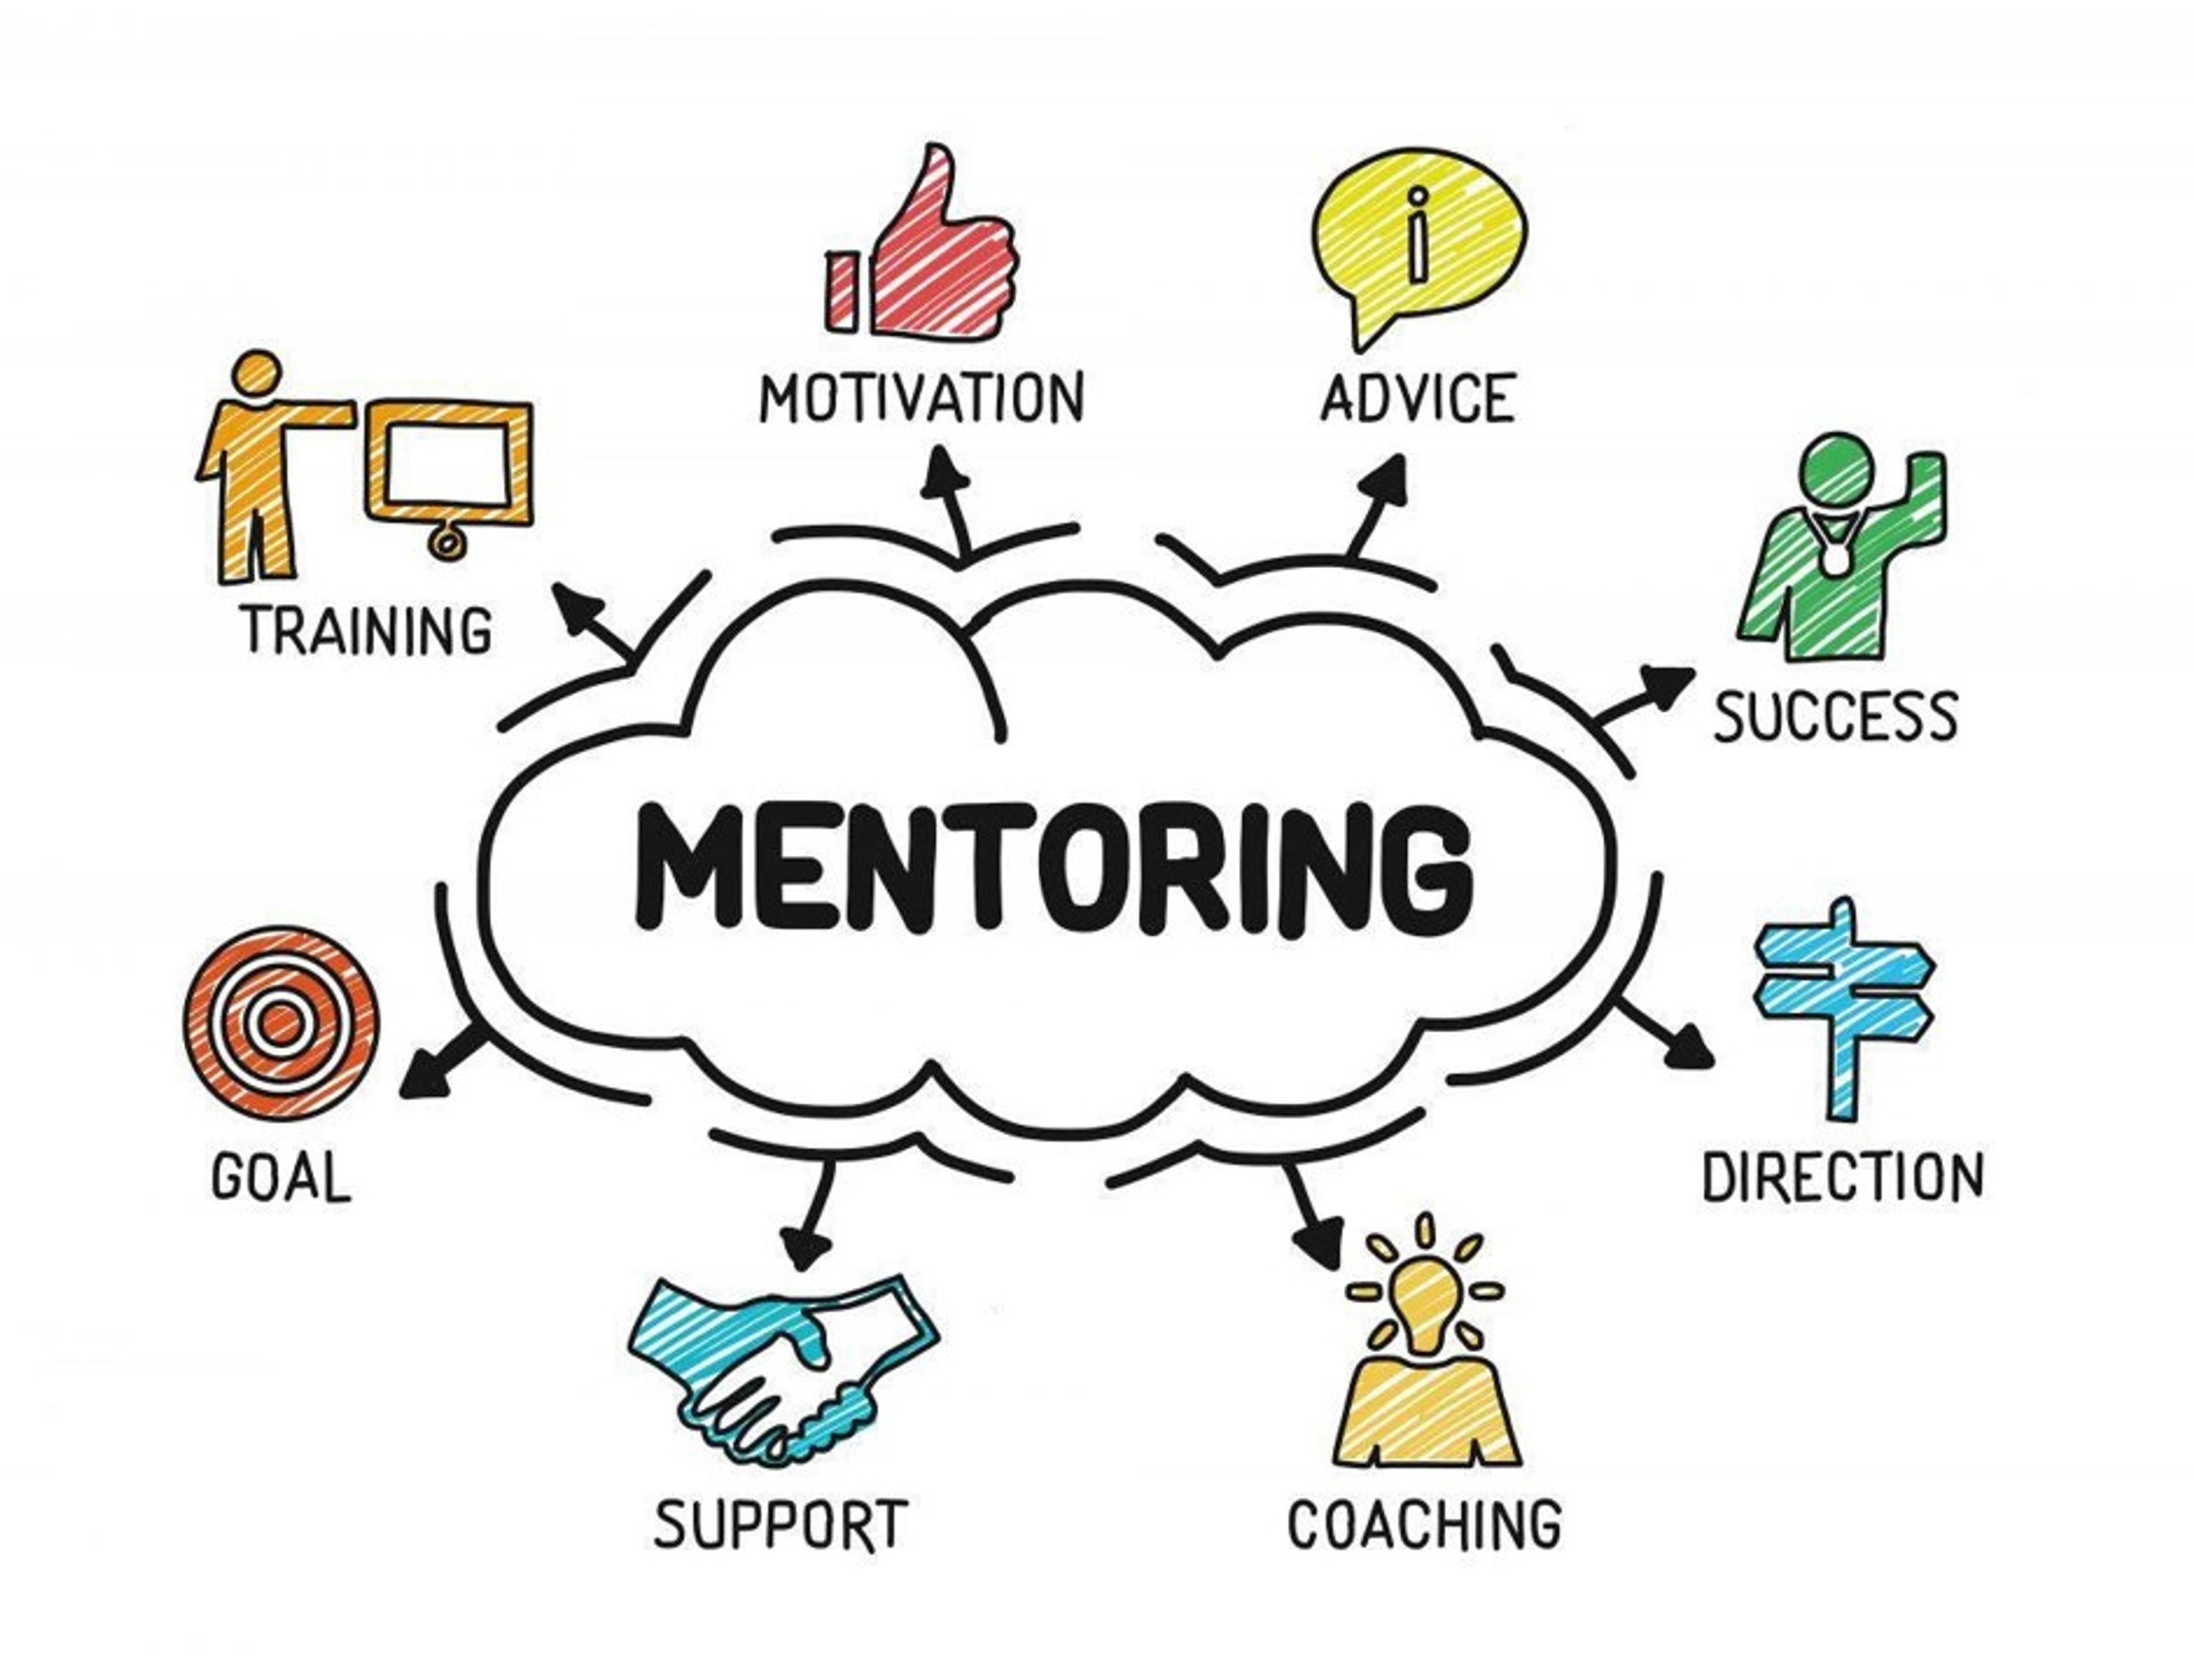 Mentorship in STEM: My experience working with and mentoring STEM students.